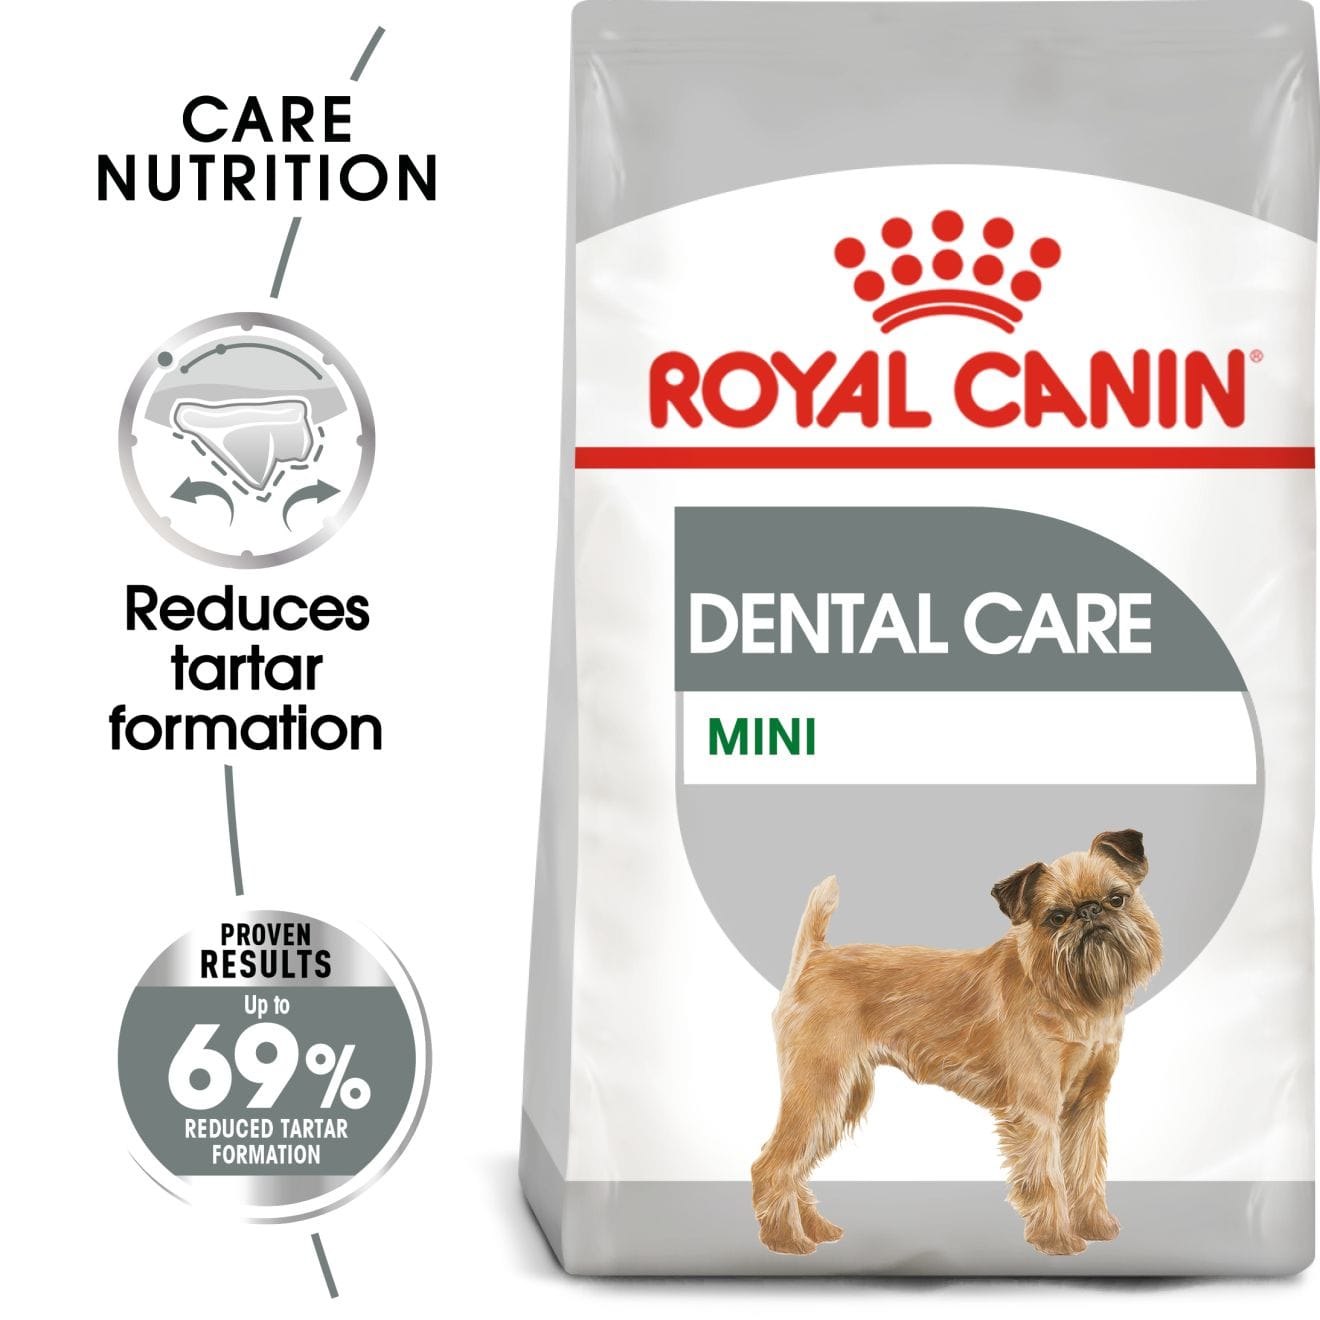 Royal Canin Oral Care=